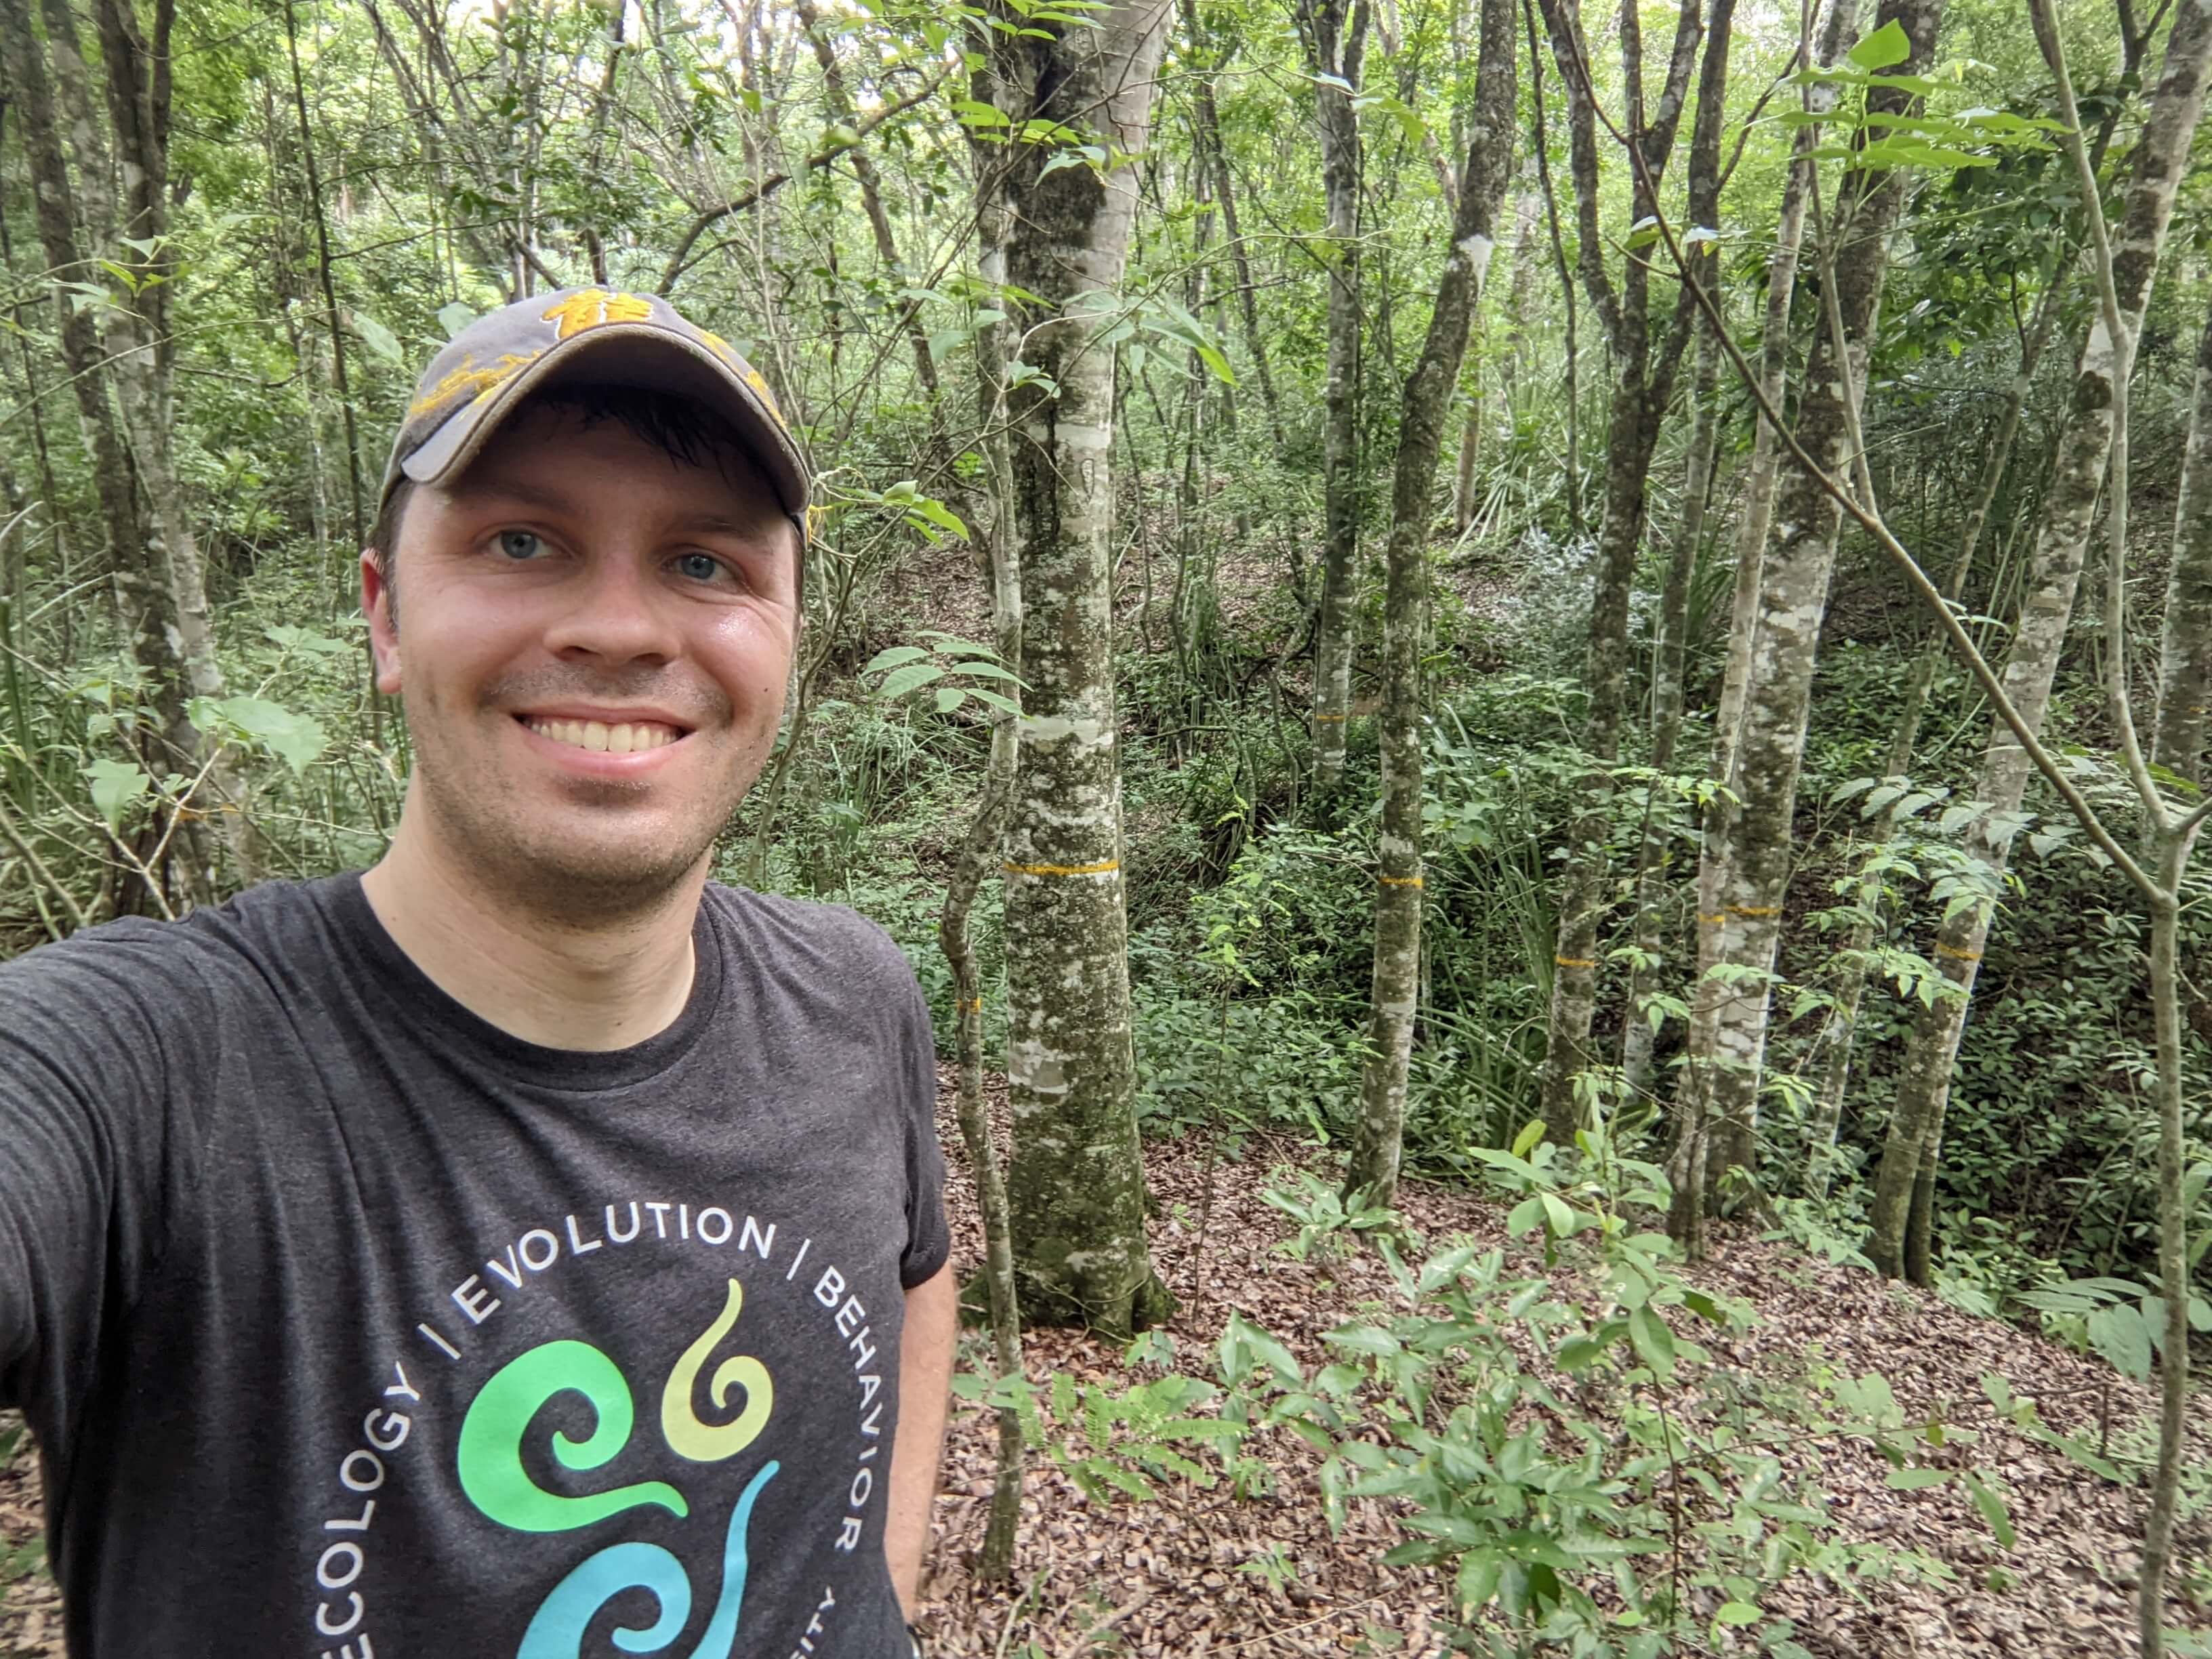 Peter Williams takes a selfie in Colombia, surrounded by trees with lush green leaves.